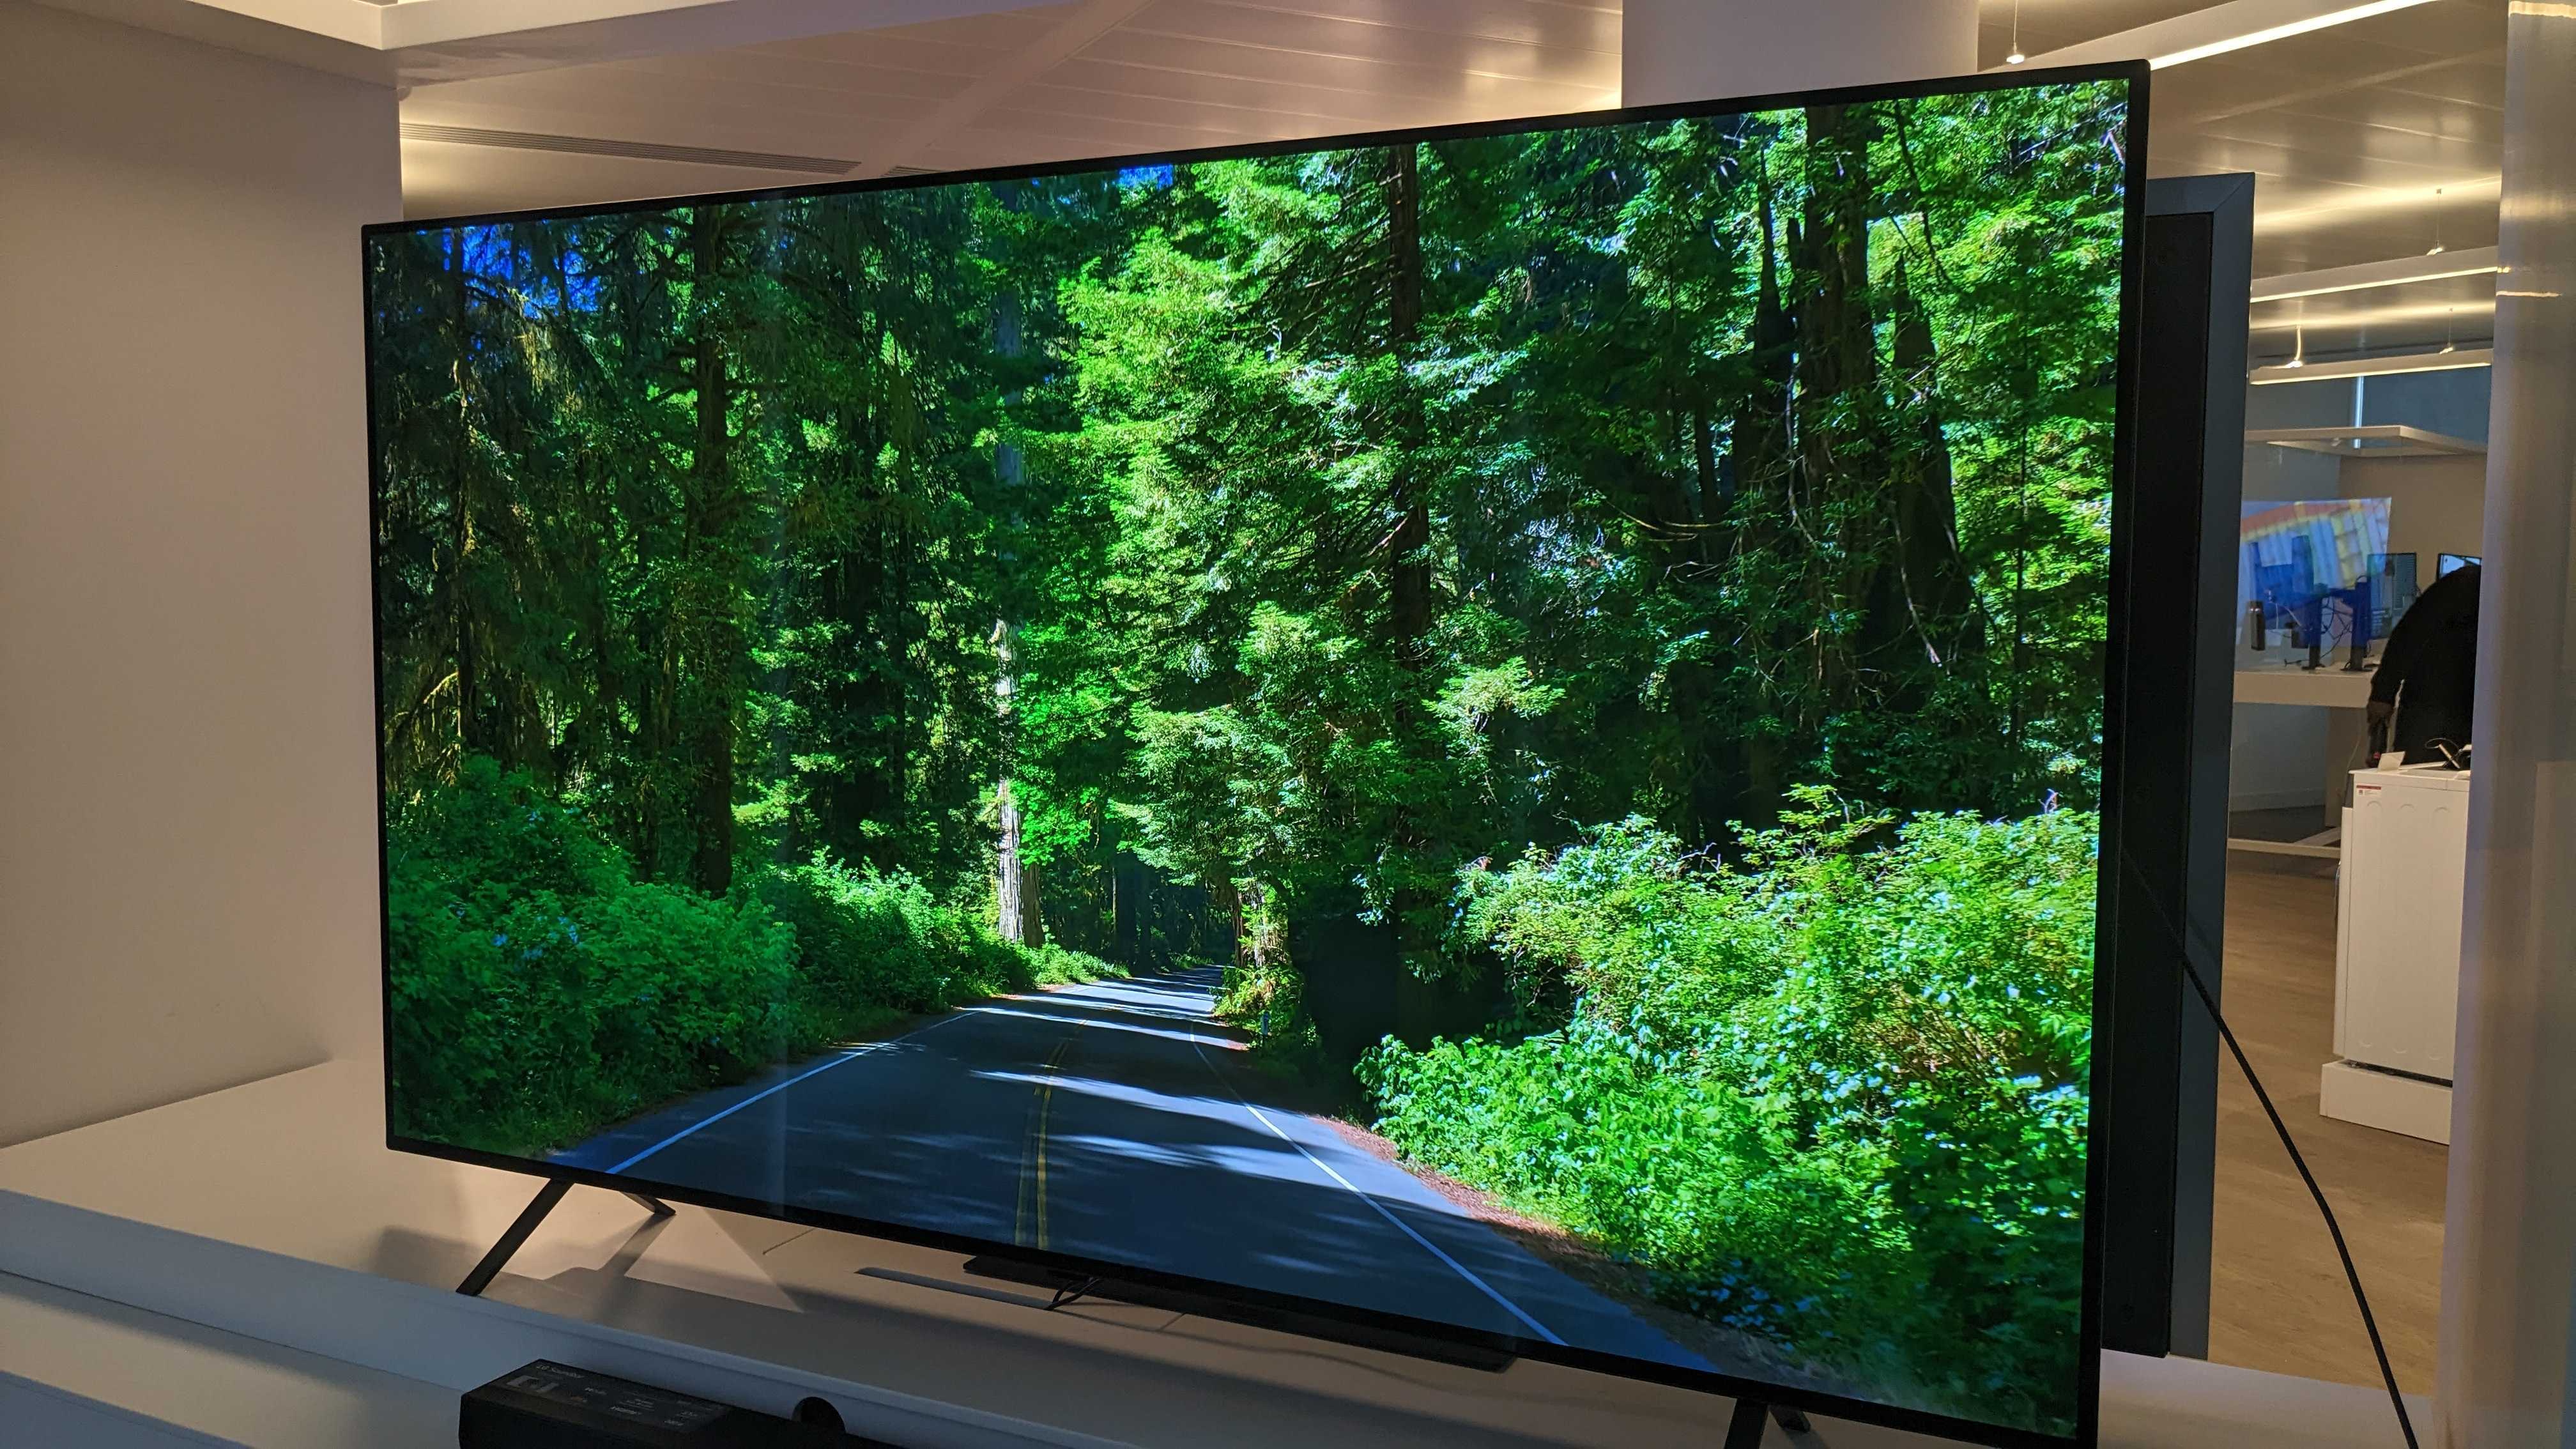 LG B4 OLED TV with green forest on screen